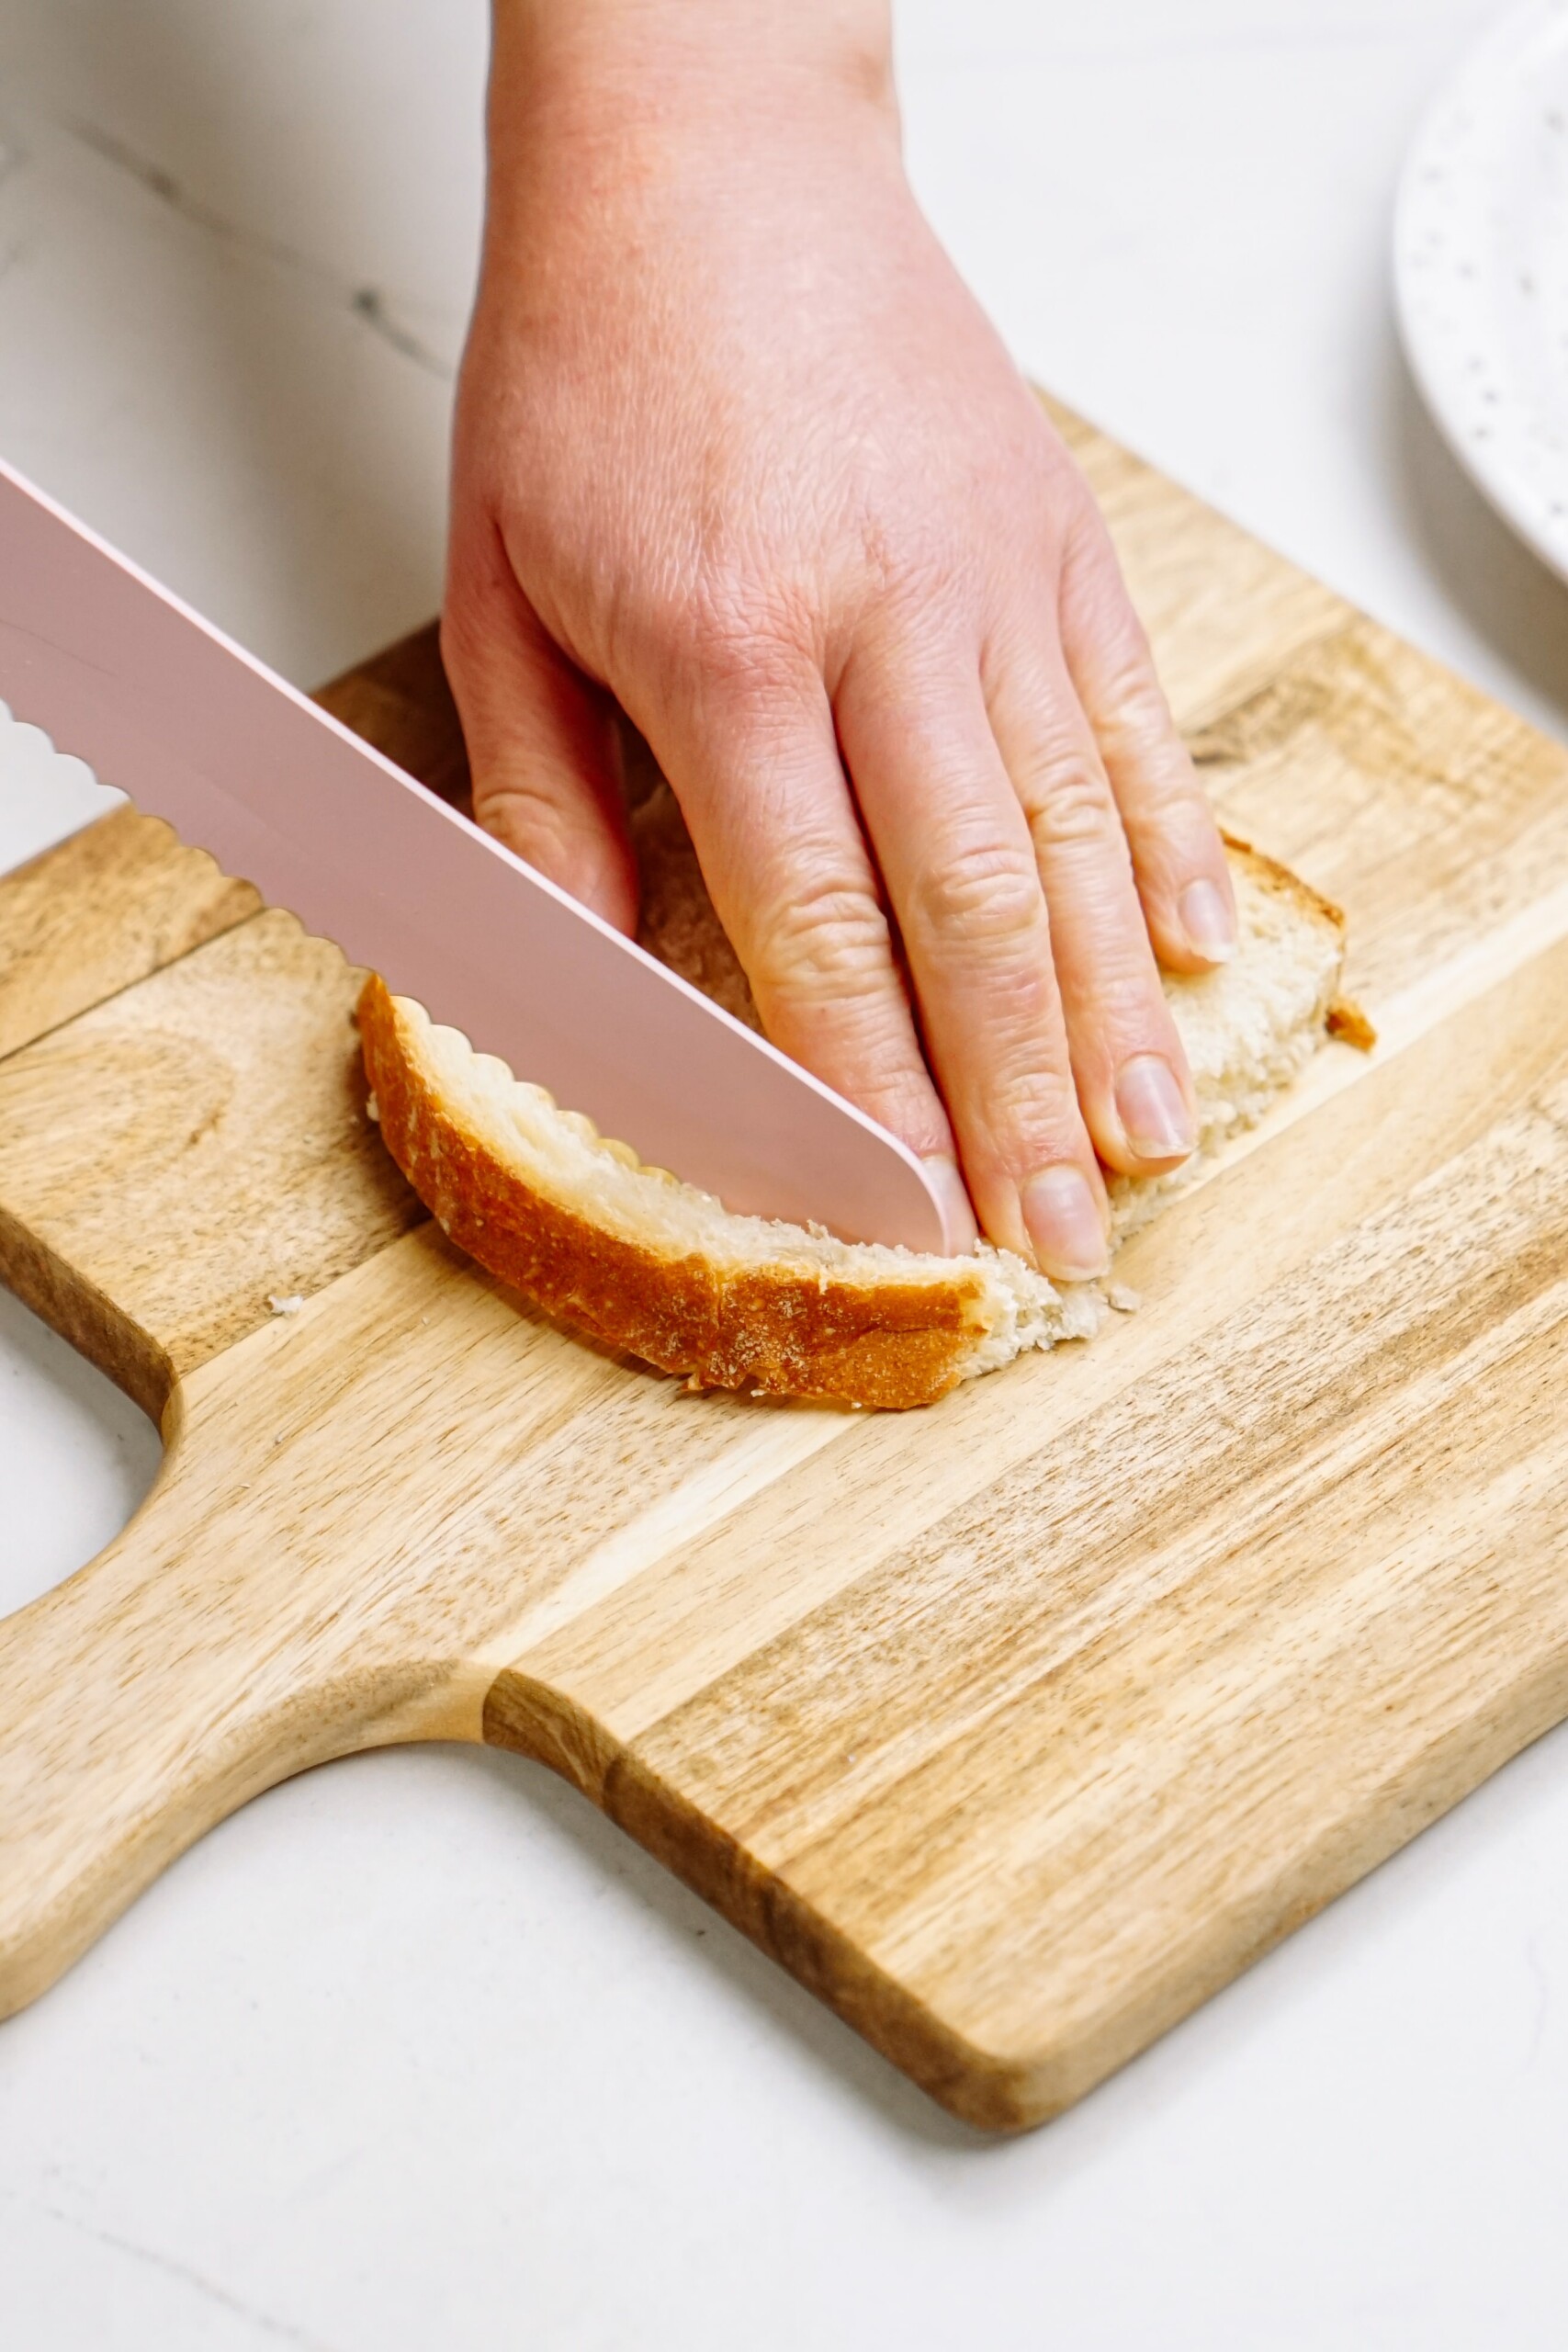 A person cutting a piece of bread on a cutting board for breakfast.